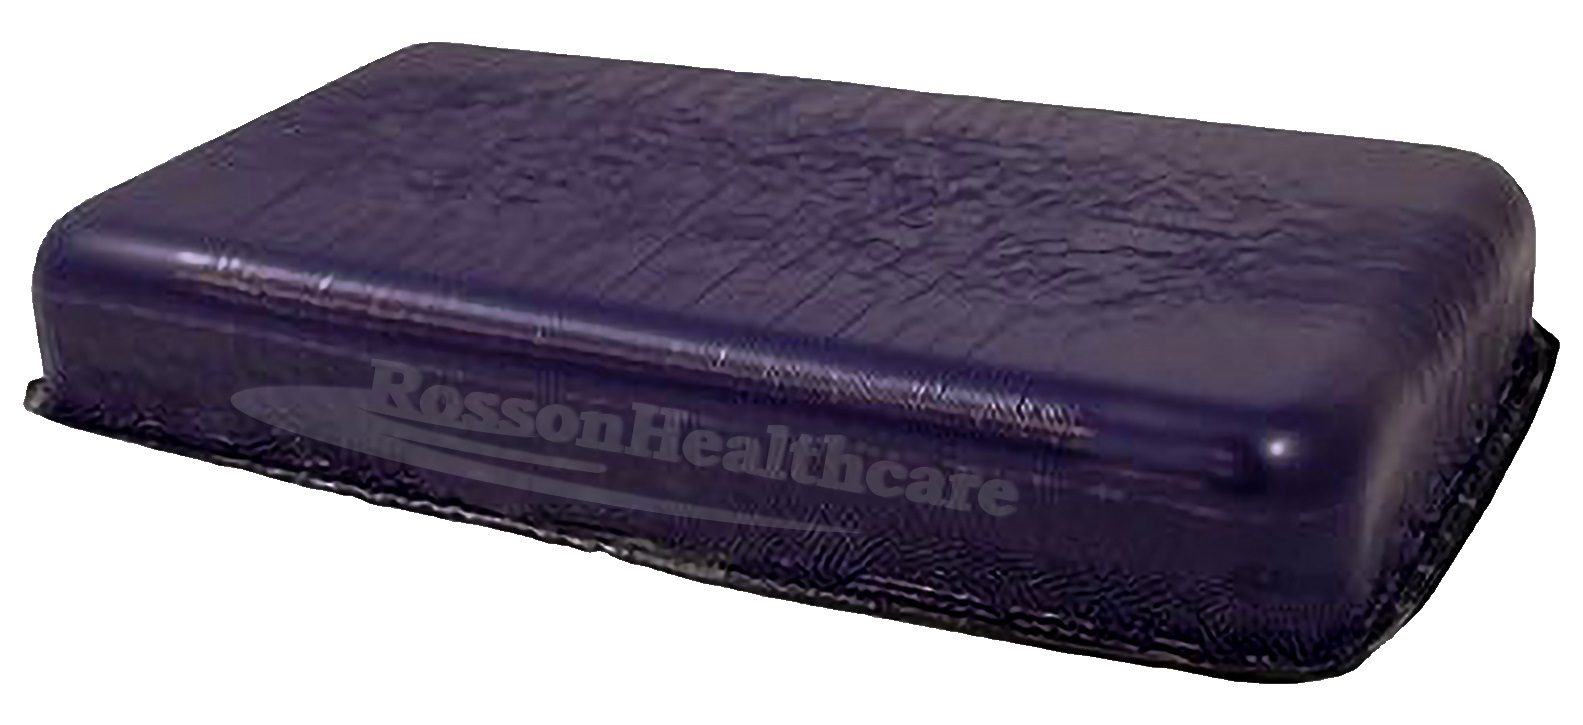 A purple mattress with the words " crosson healthcare ".